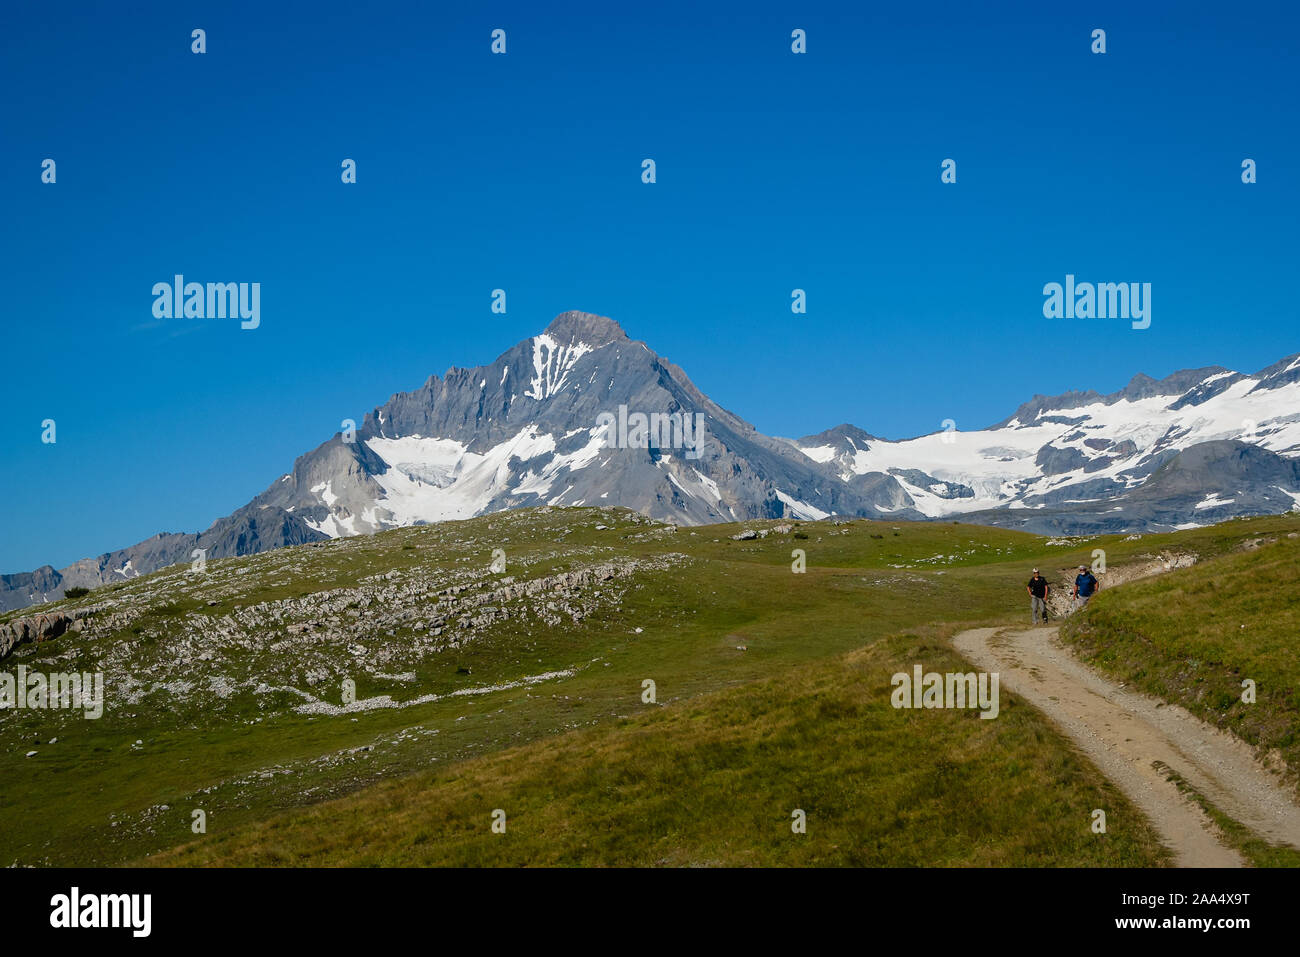 A couple of elderly tourists hiking in Vanoise National Park, French Alps. Beautiful mountain with snowy slopes and clear blue sky on the hohorizon. Stock Photo